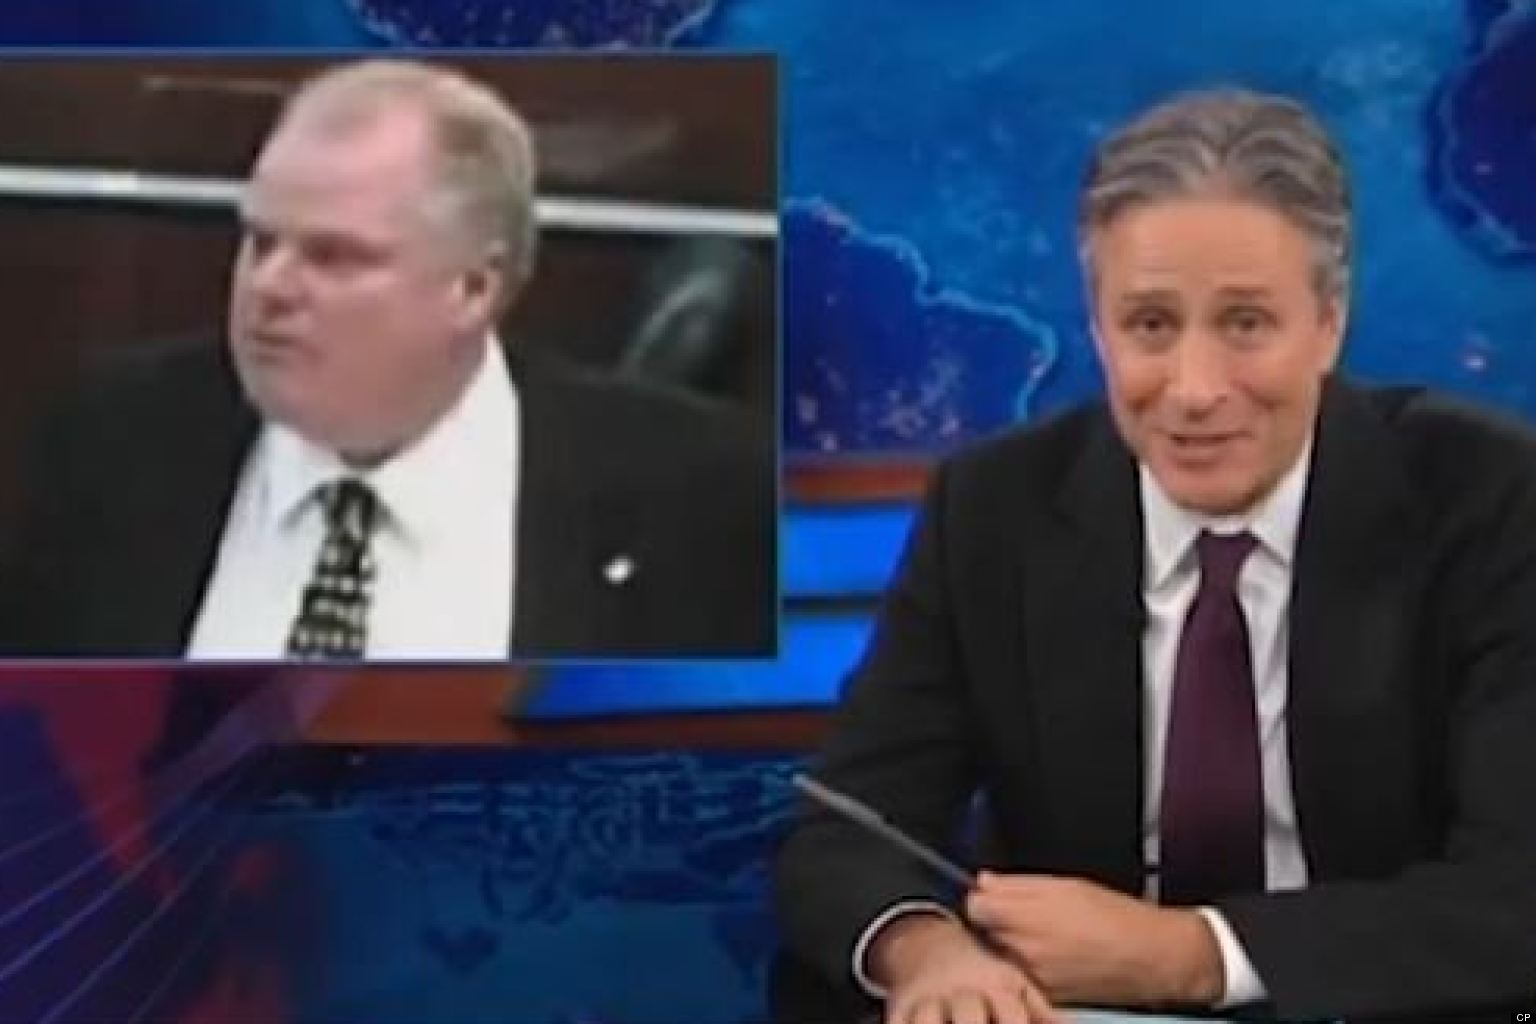 Rob ford on daily show